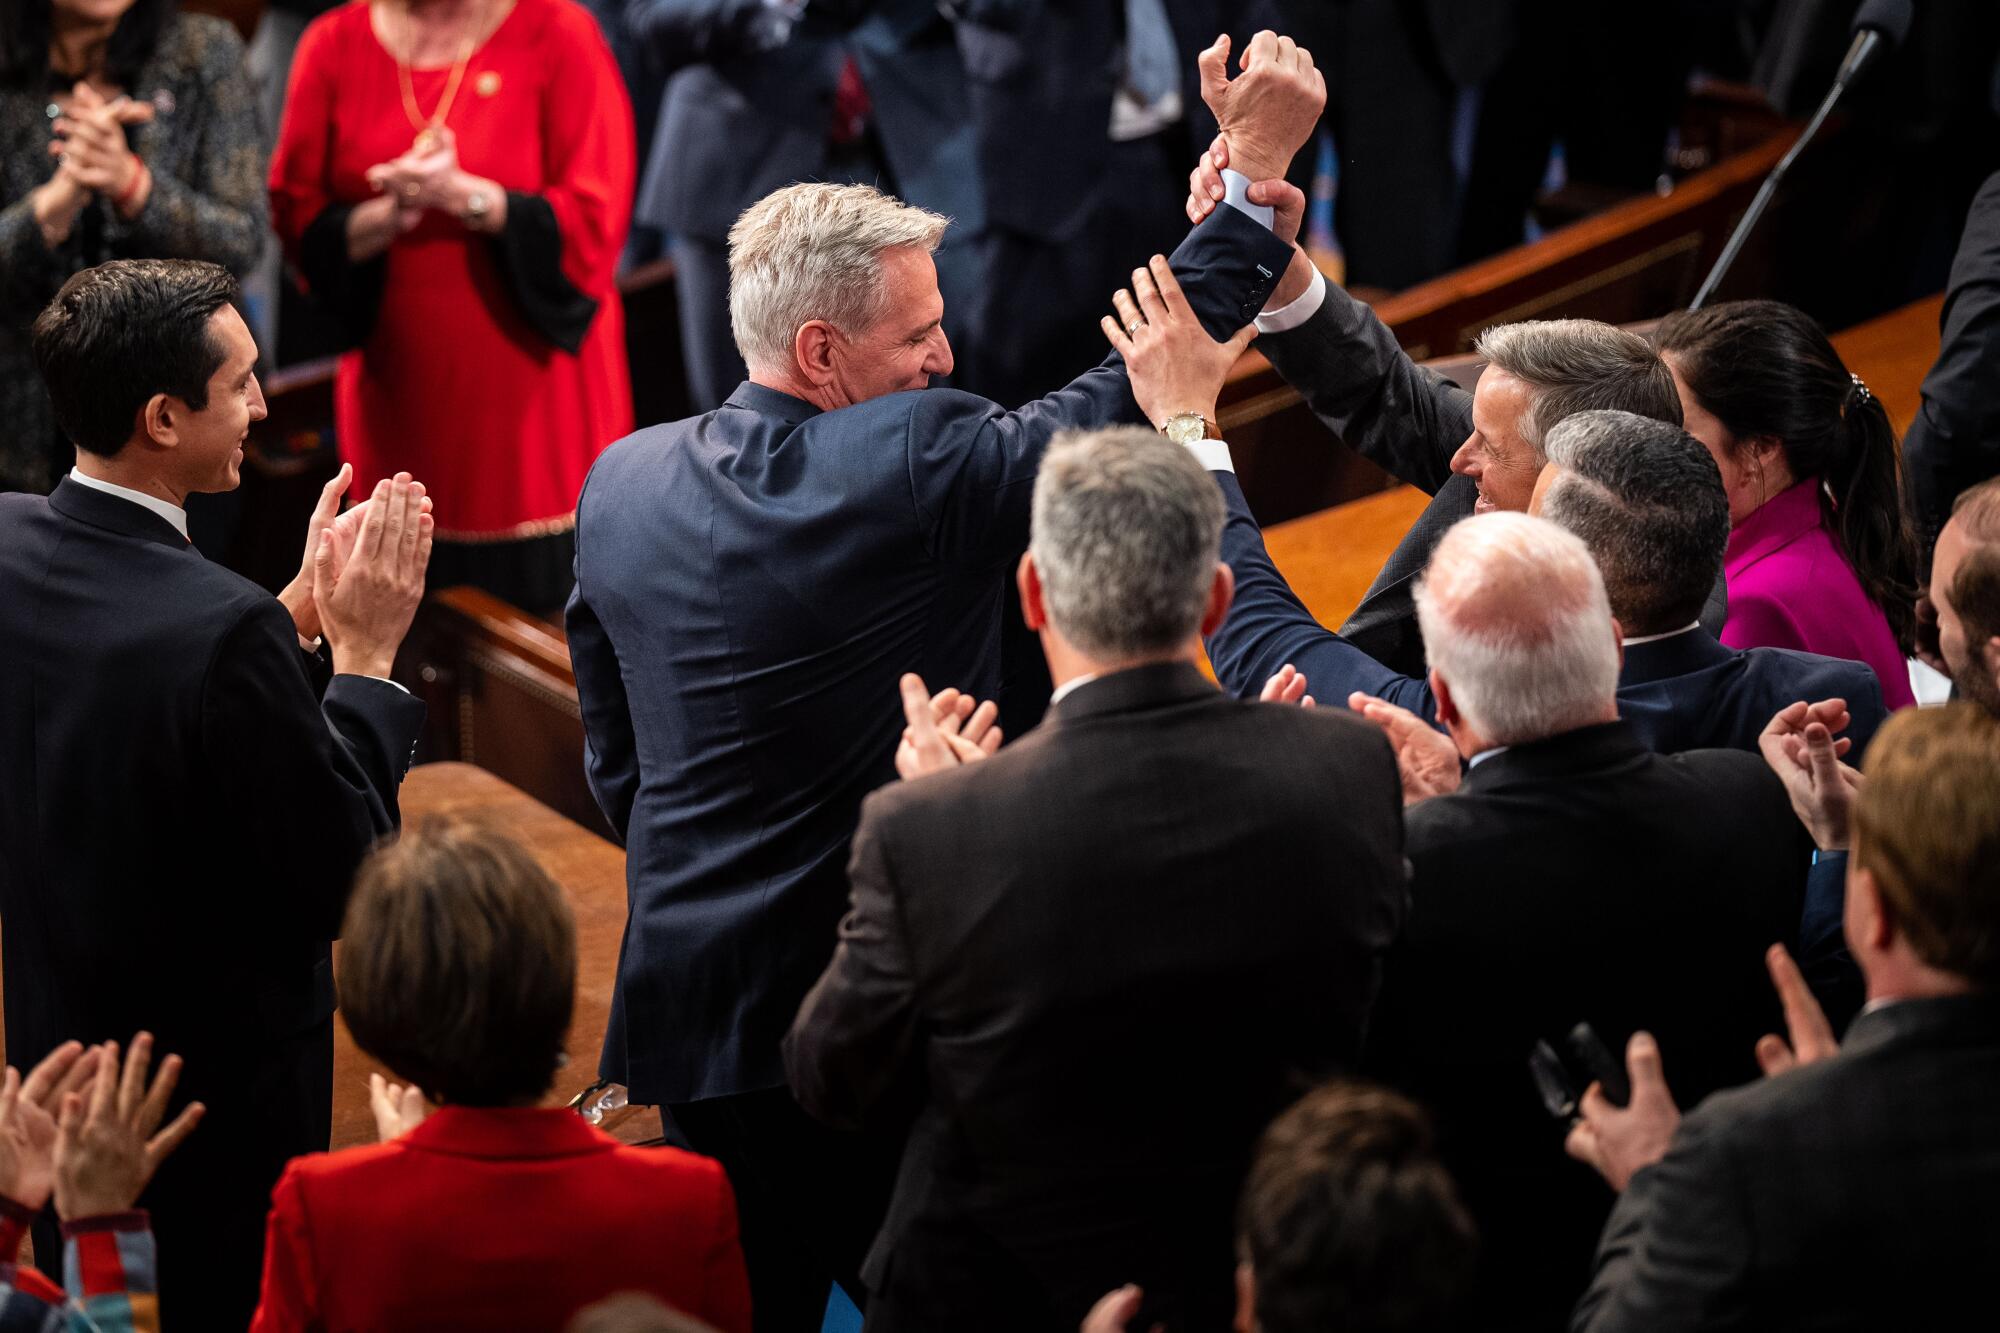 Rep. Kevin McCarthy (R-Bakersfield) cheers after he is elected speaker of the House of Representatives.